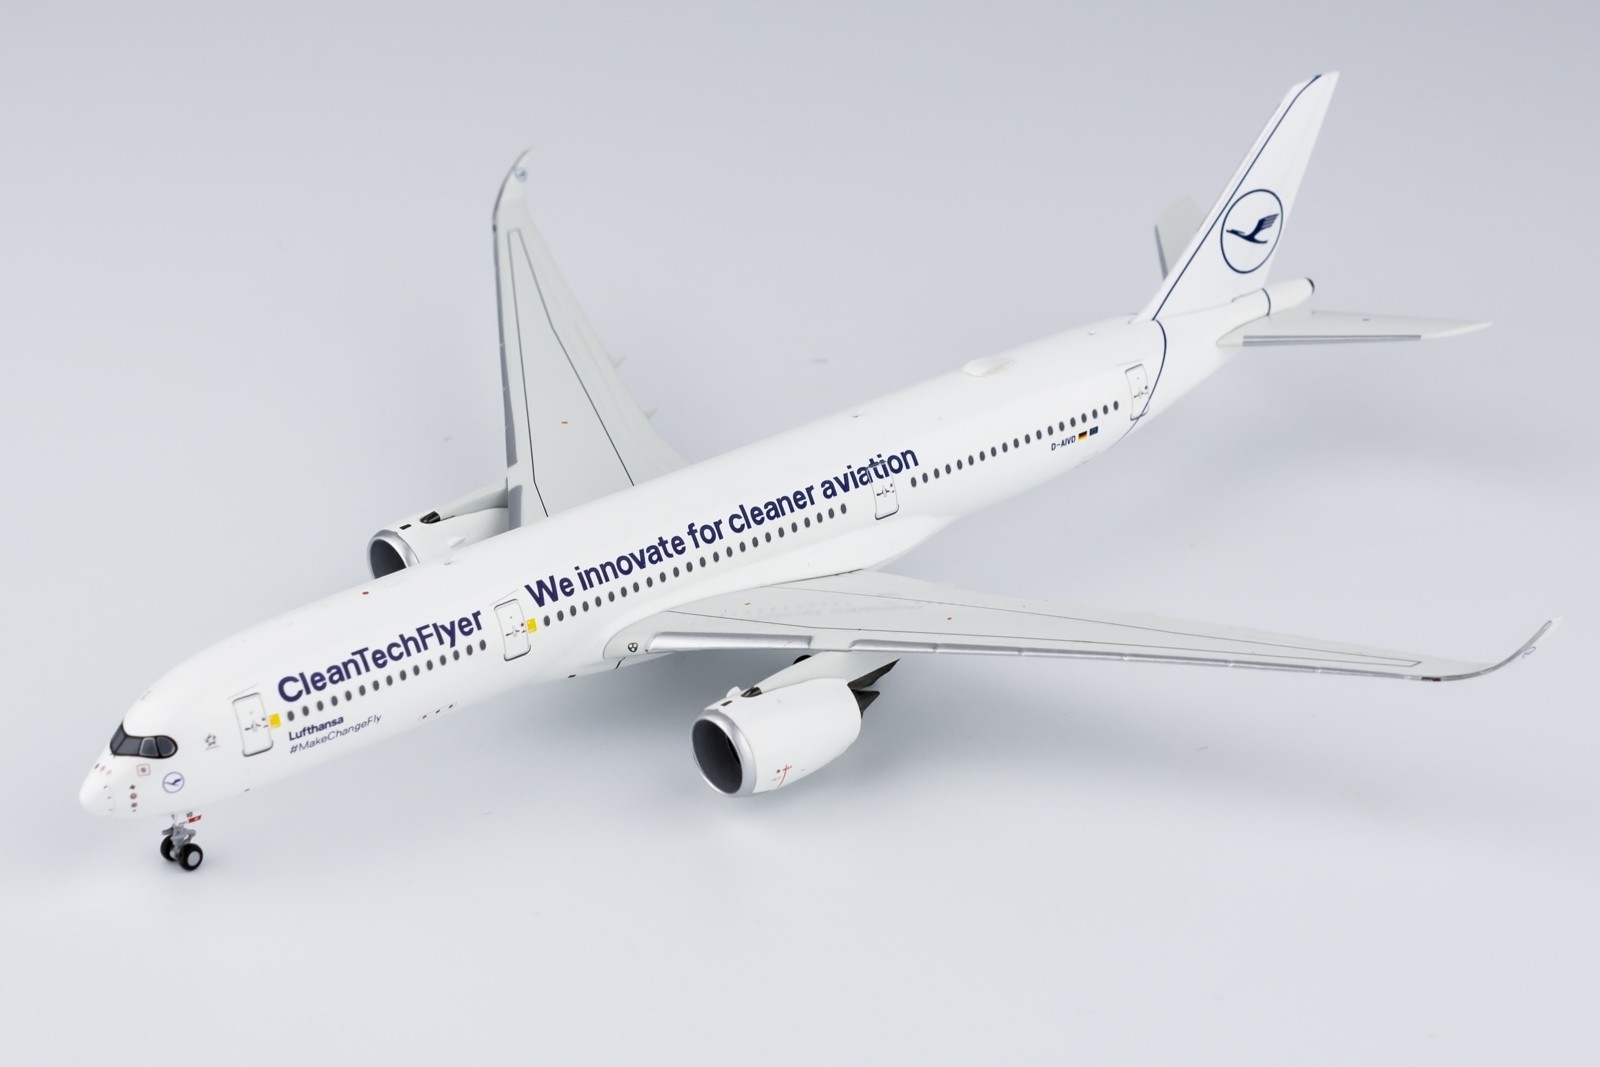 lufthansa_airbus_a350-900_d-aivd_clean_tech_flyer_ng_models_ng_model_39040_scale_1-400_1.jpg